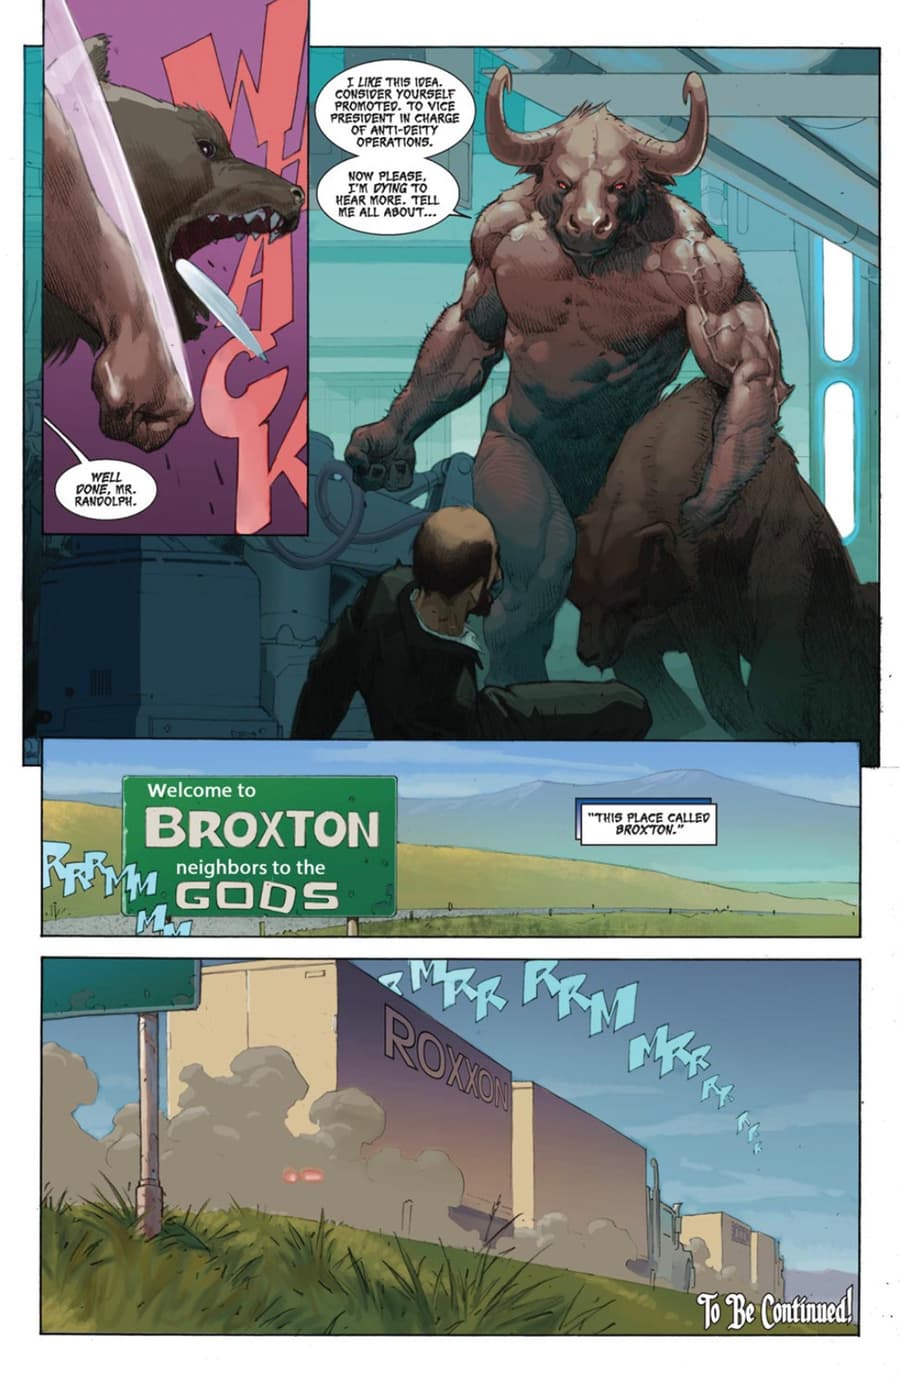 THOR: GOD OF THUNDER (2012) #20 page by Jason Aaron and Esad Ribic